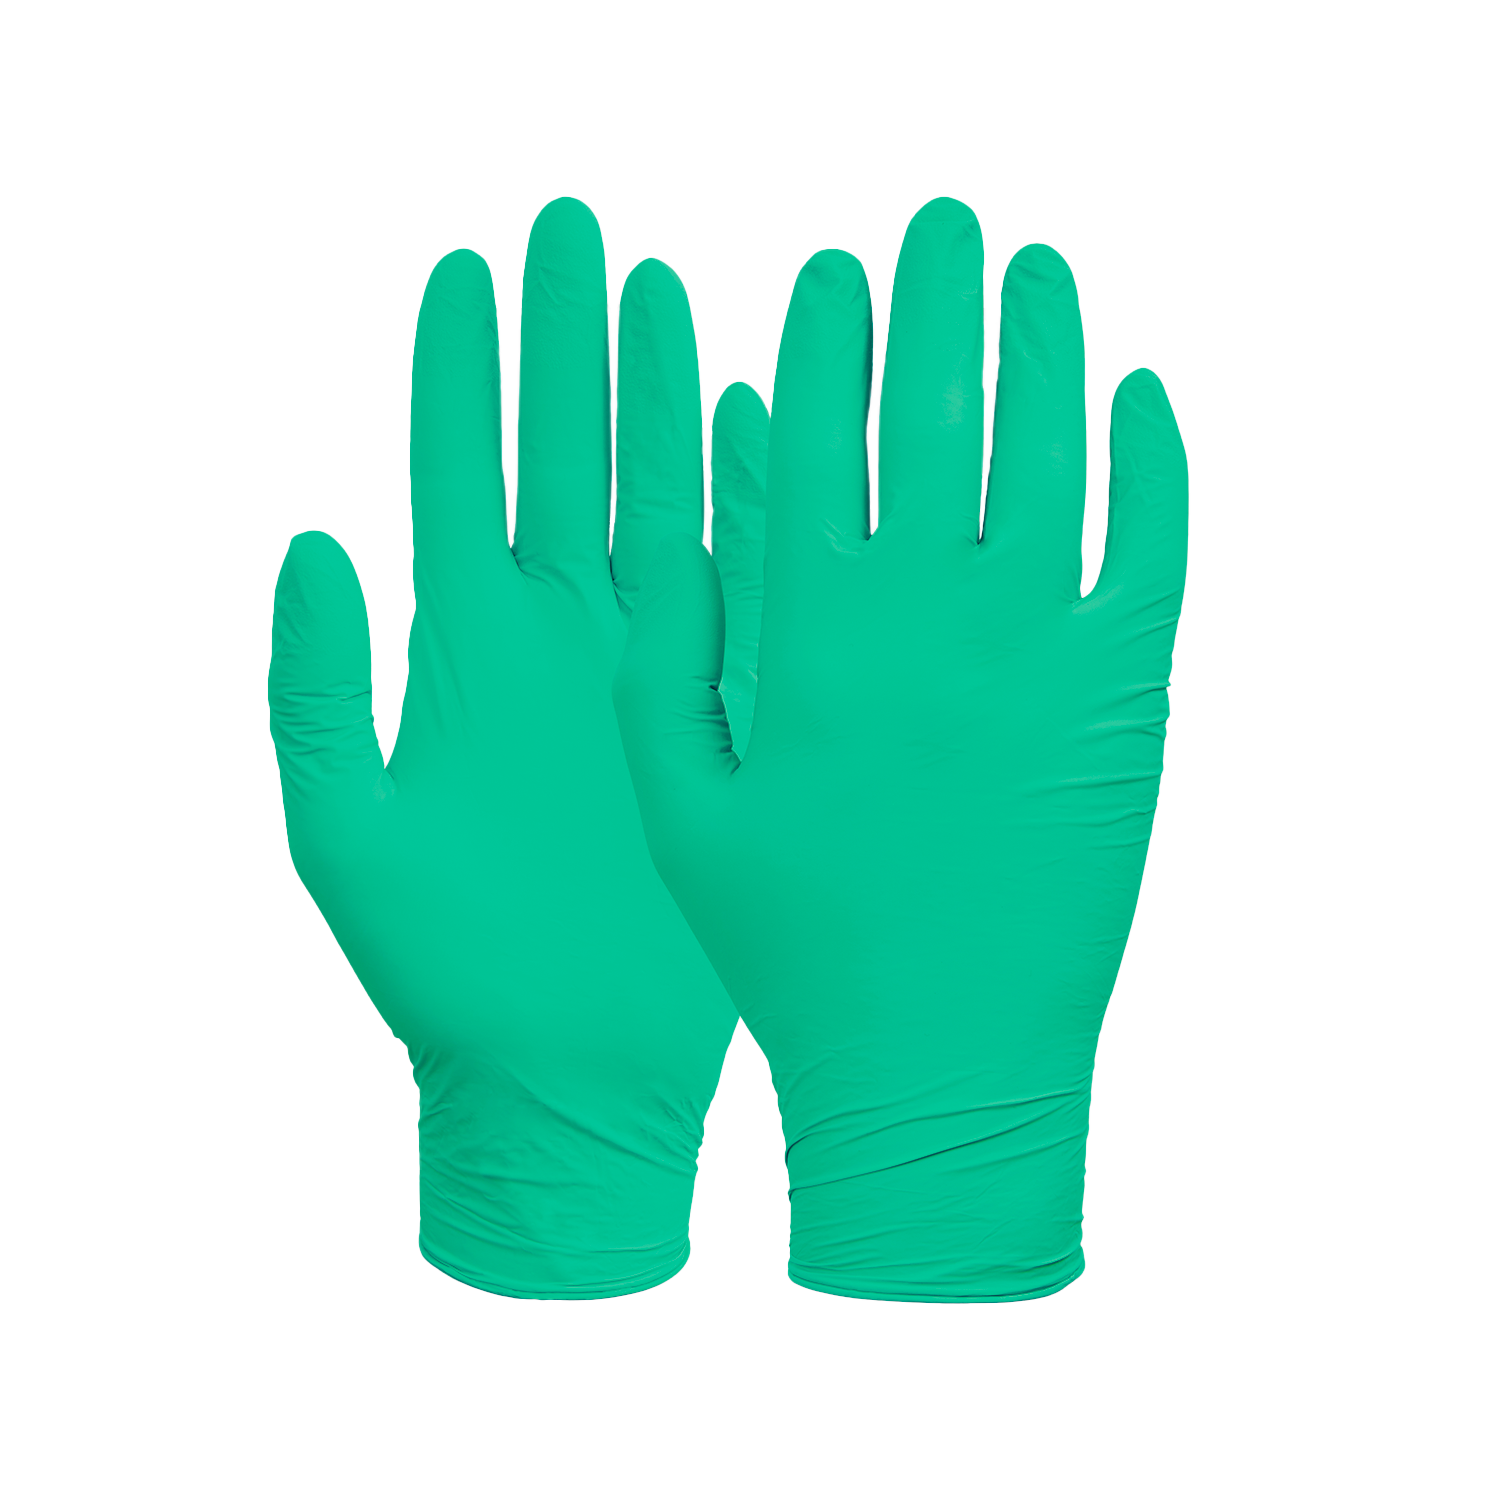 NORSE Disposable Green Green disposable nitrile gloves - size 8/M